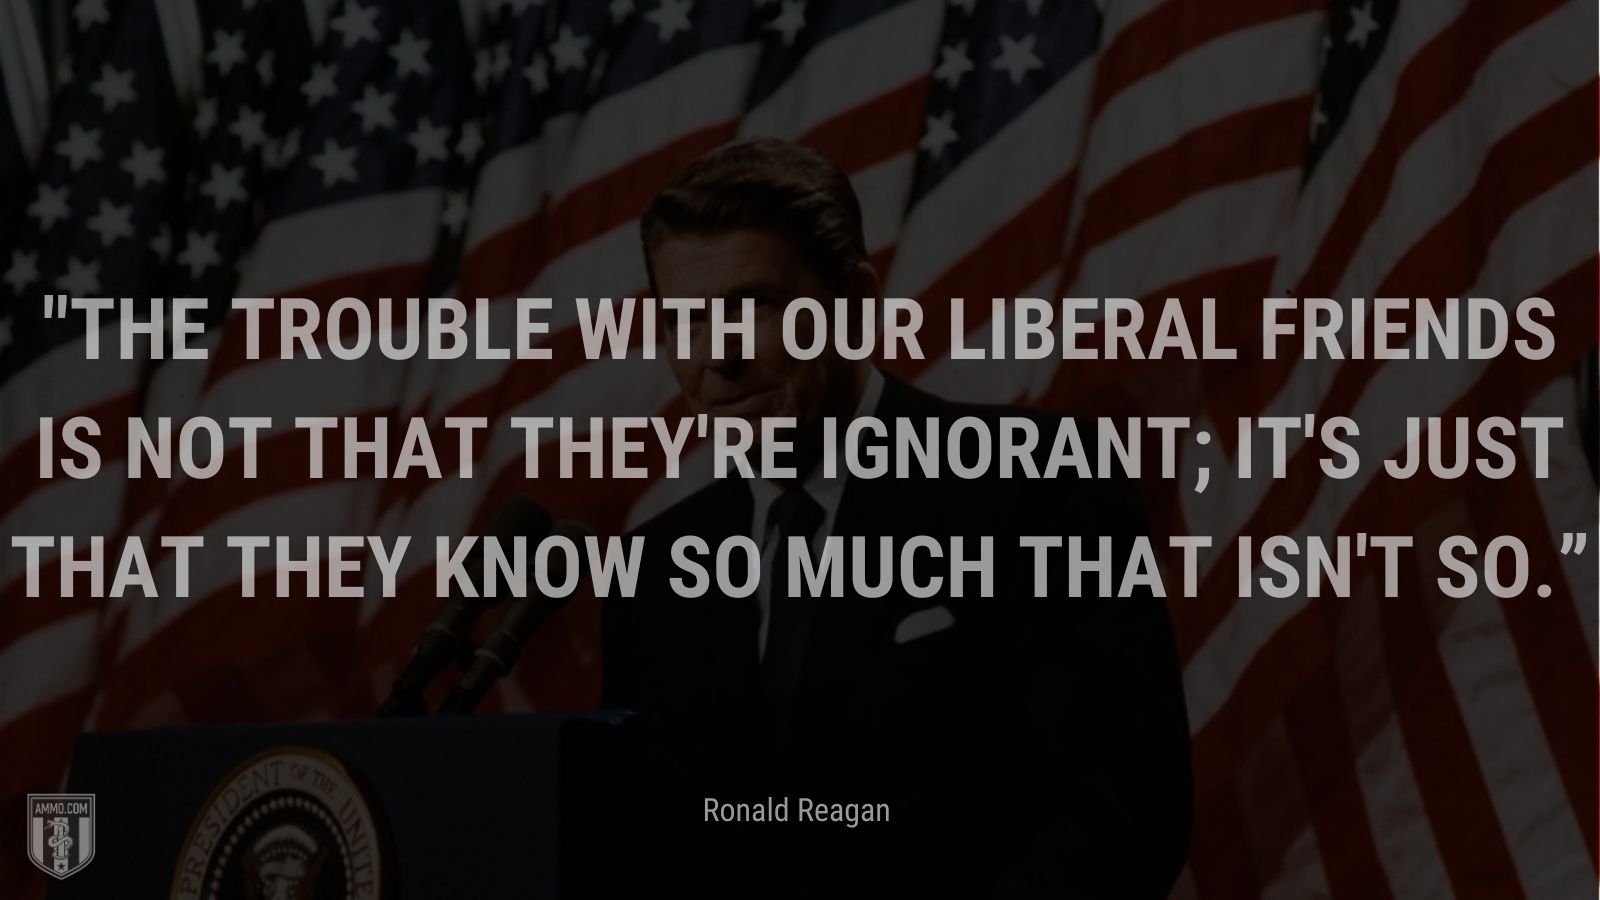 “The trouble with our liberal friends is not that they're ignorant; it's just that they know so much that isn't so.” - Ronald Reagan